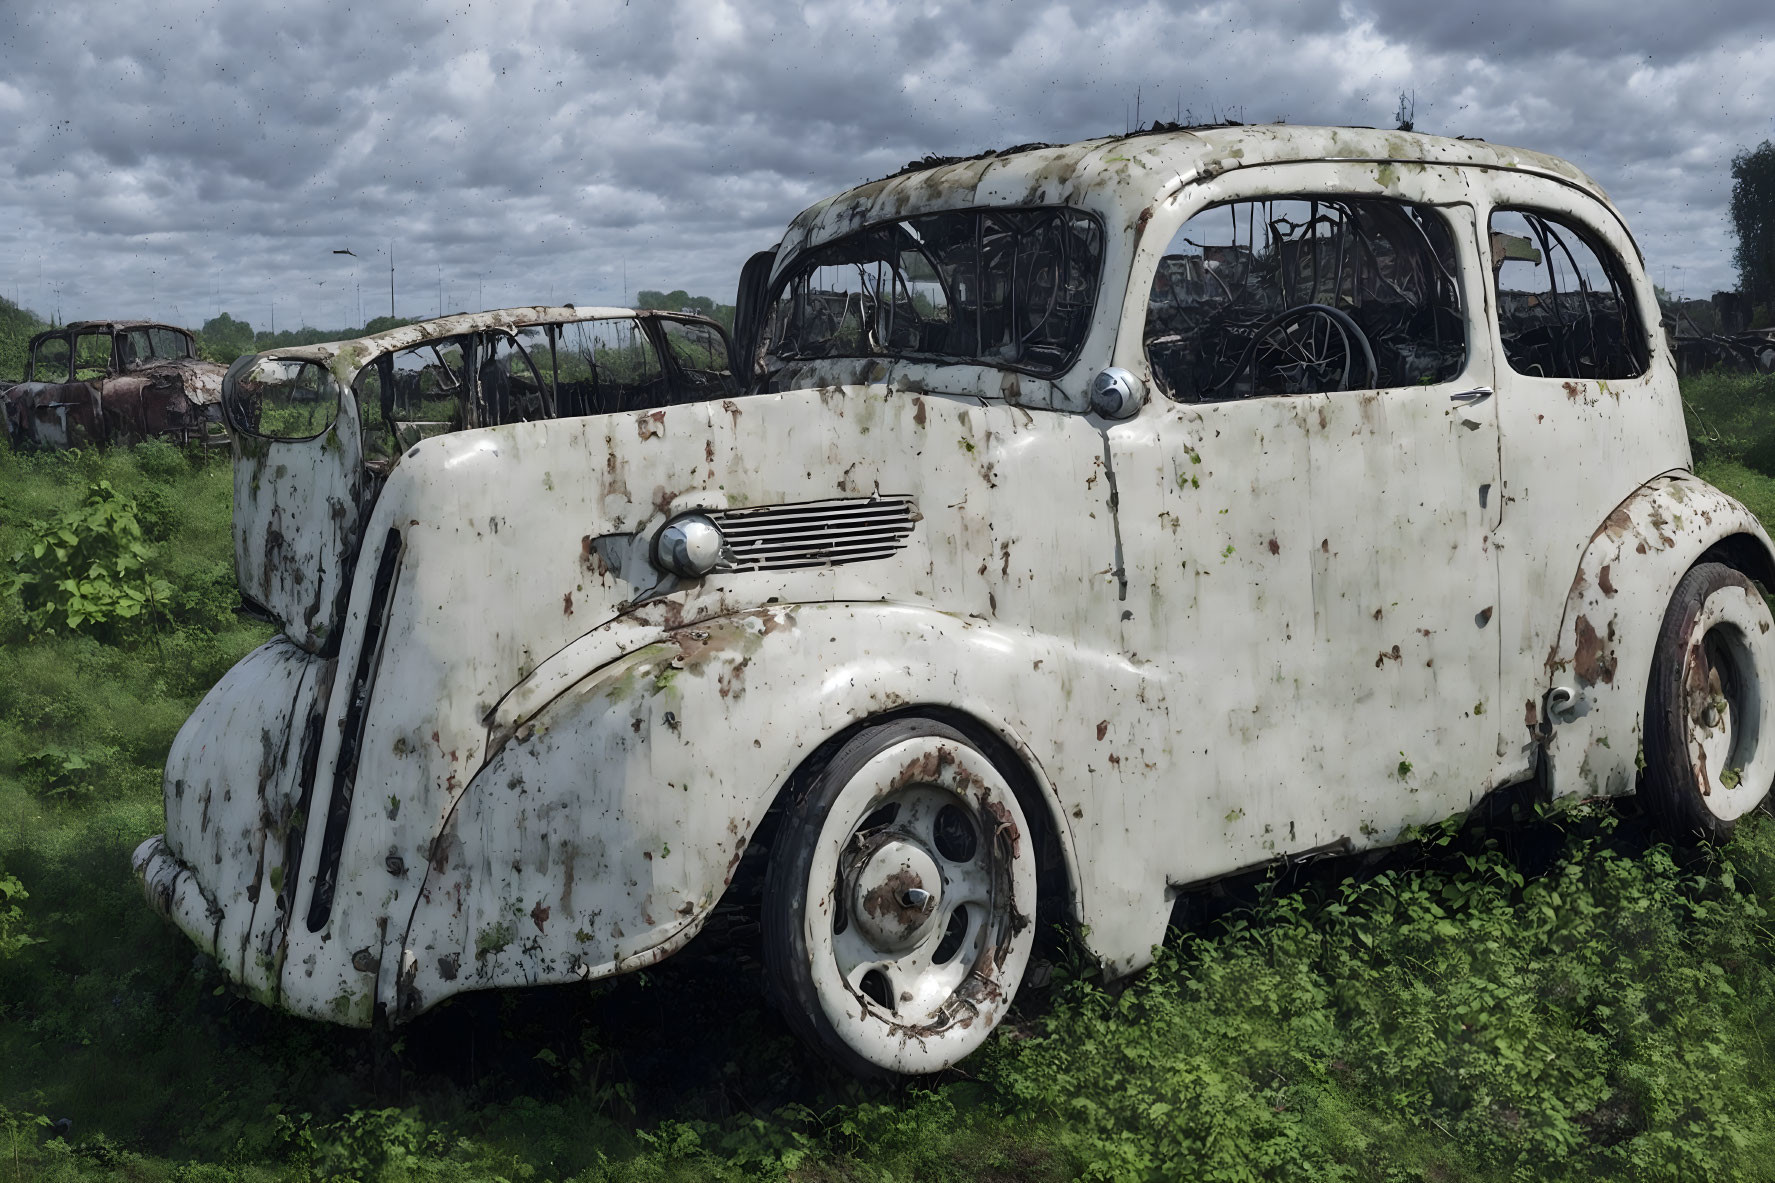 Weathered white car in overgrown vegetation under cloudy sky